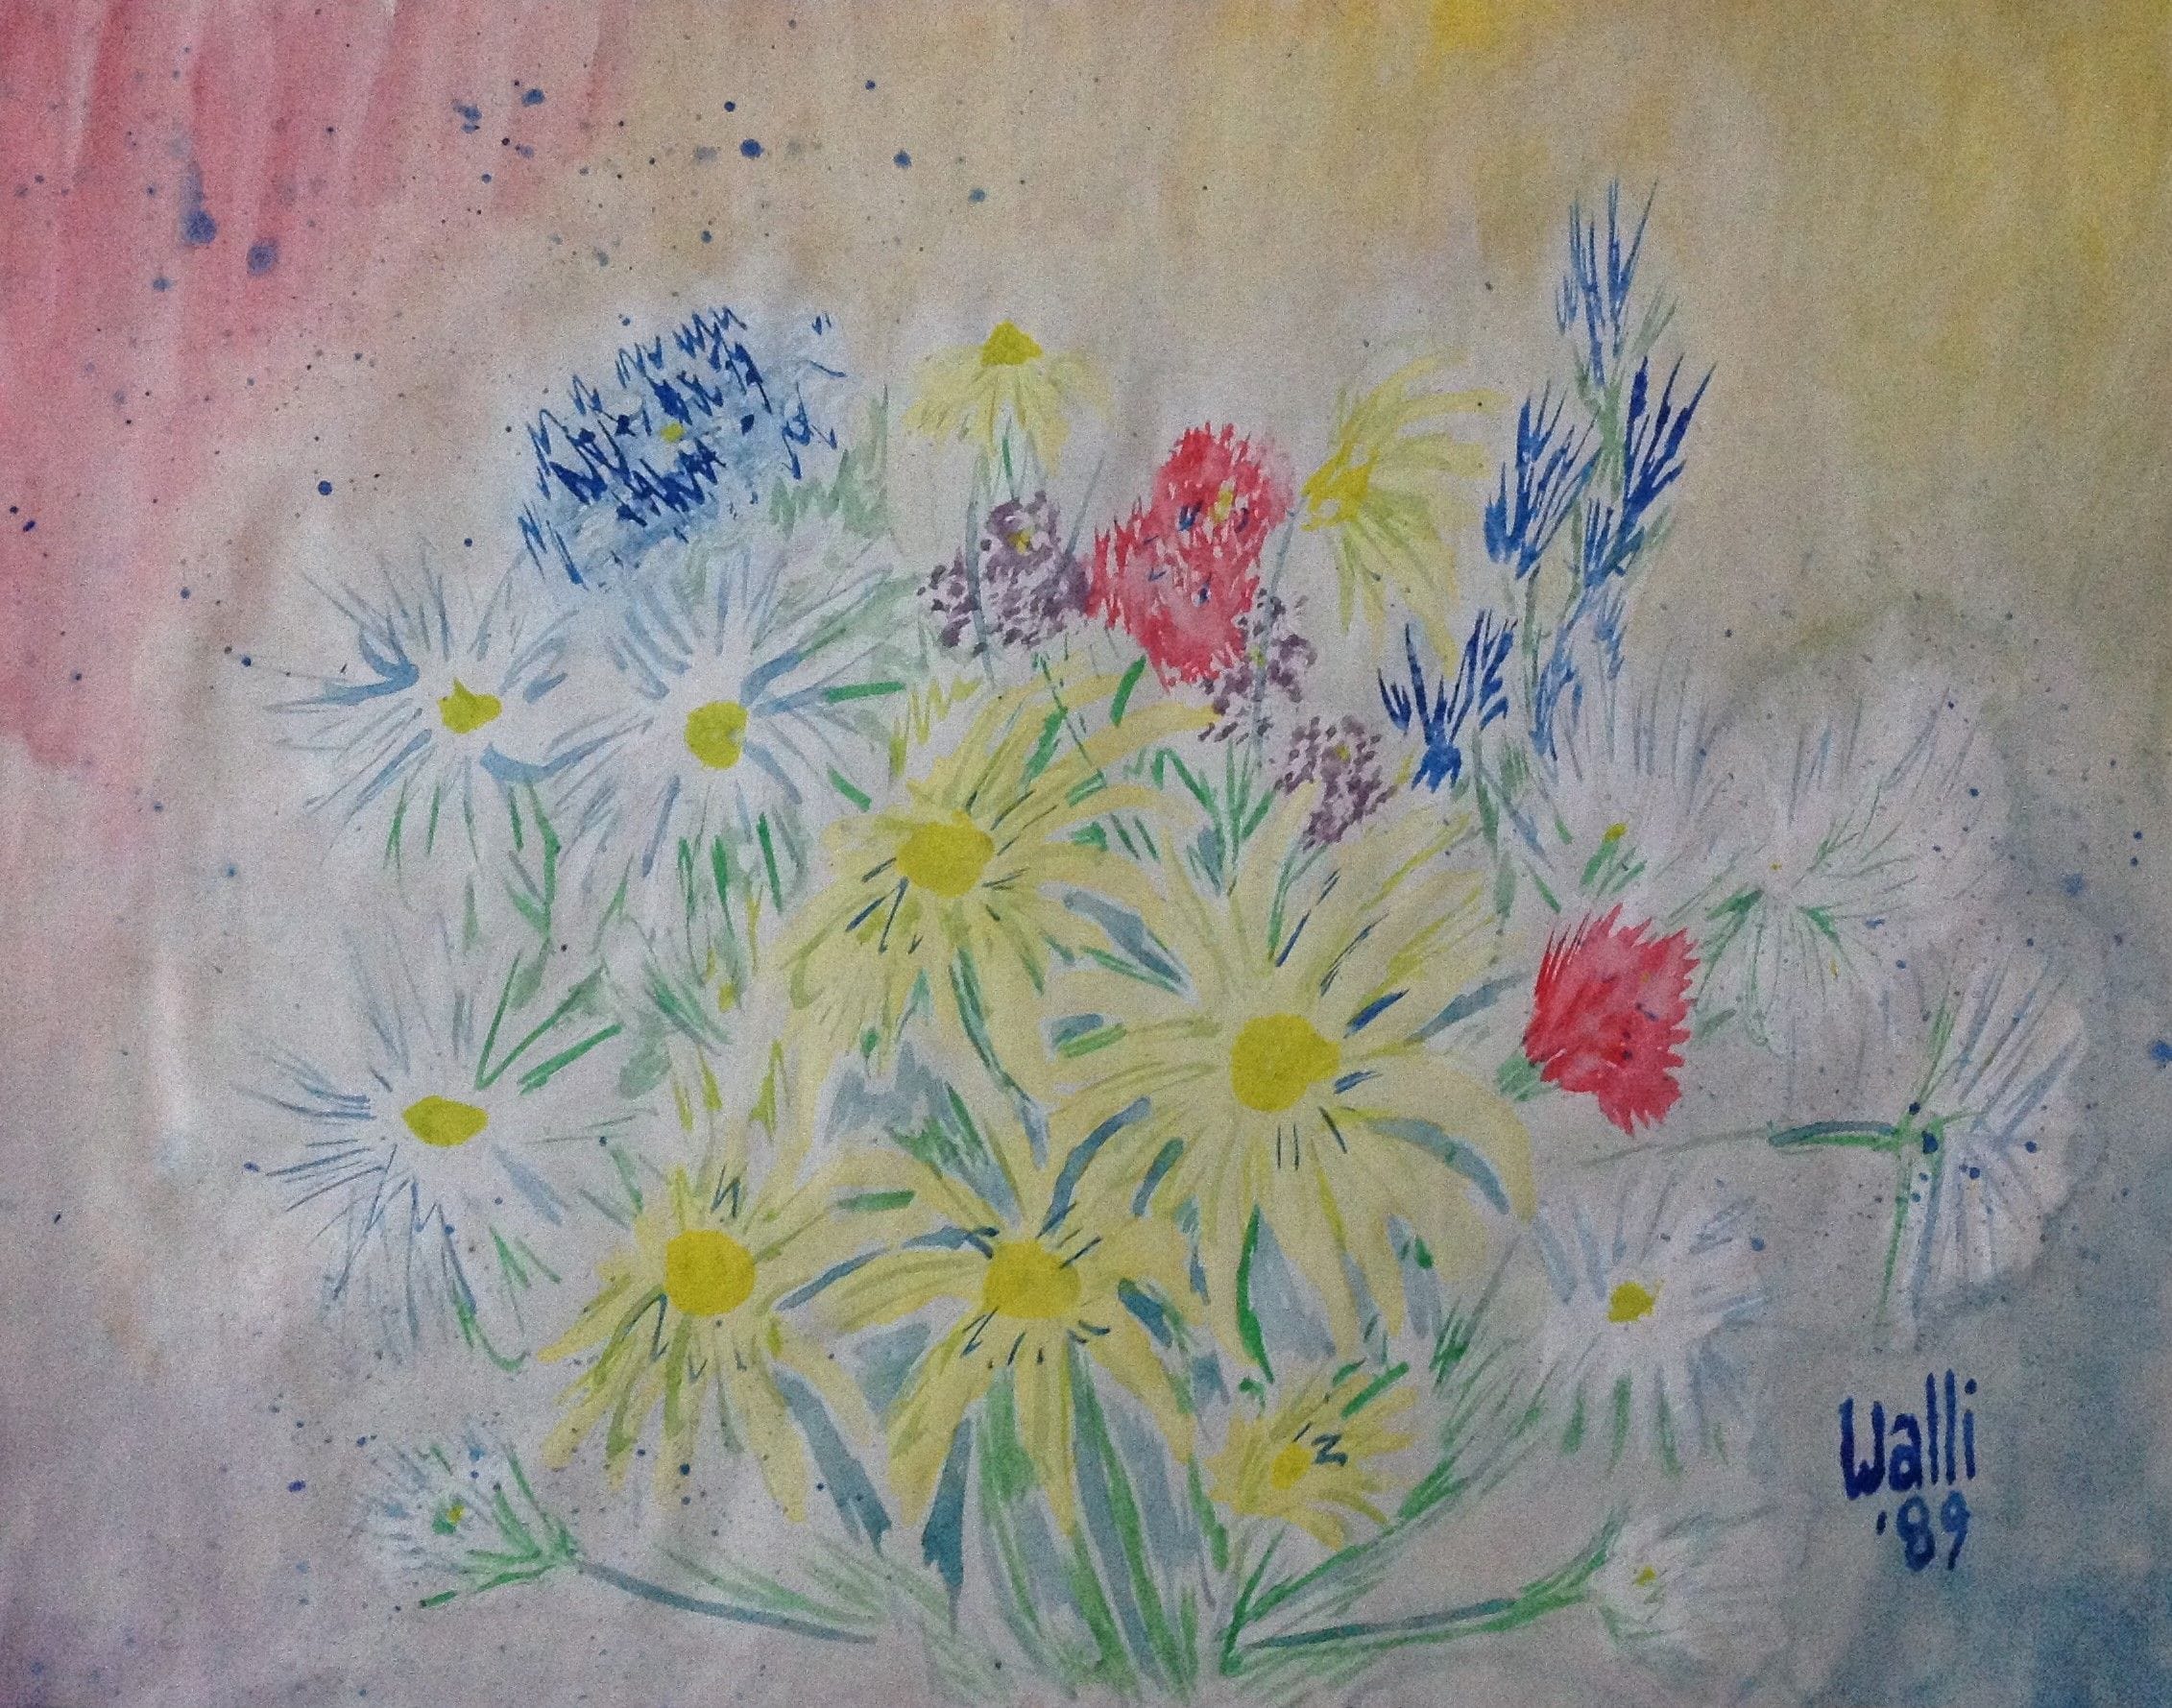 Spring Flowers, 1989
Watercolor on Paper
15"W x 11"H, Walli White, artist